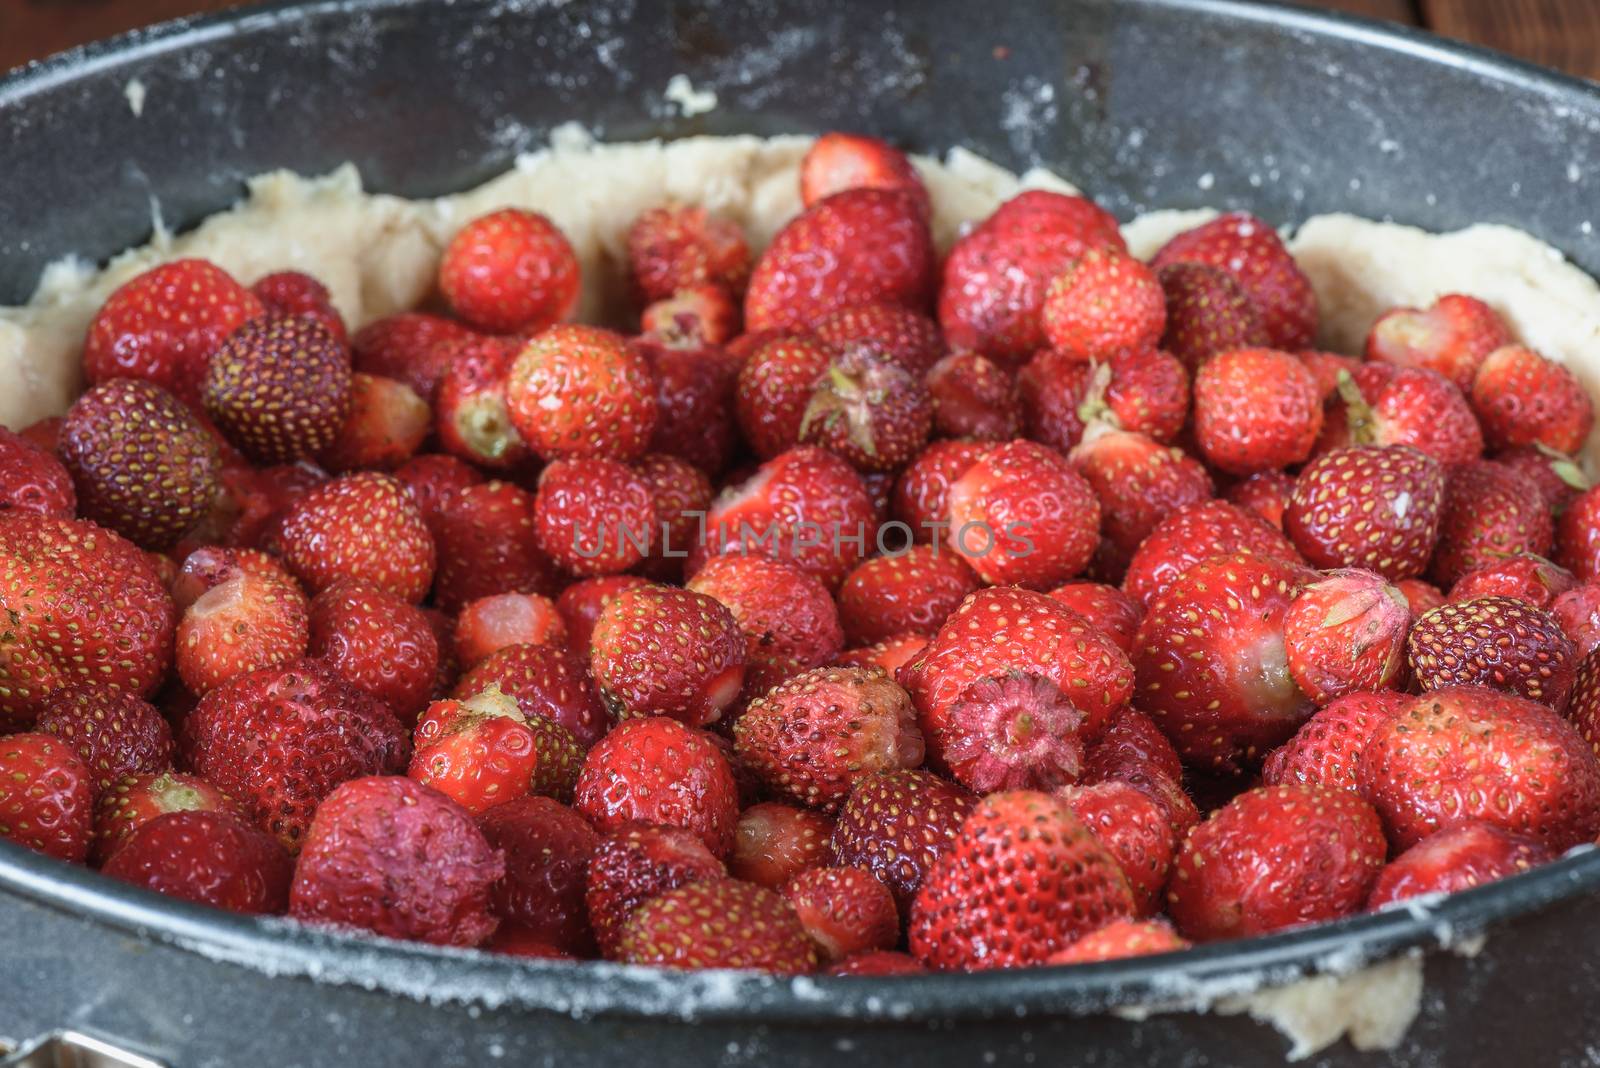 Cooking strawberry cake in metal baking dish on wooden table